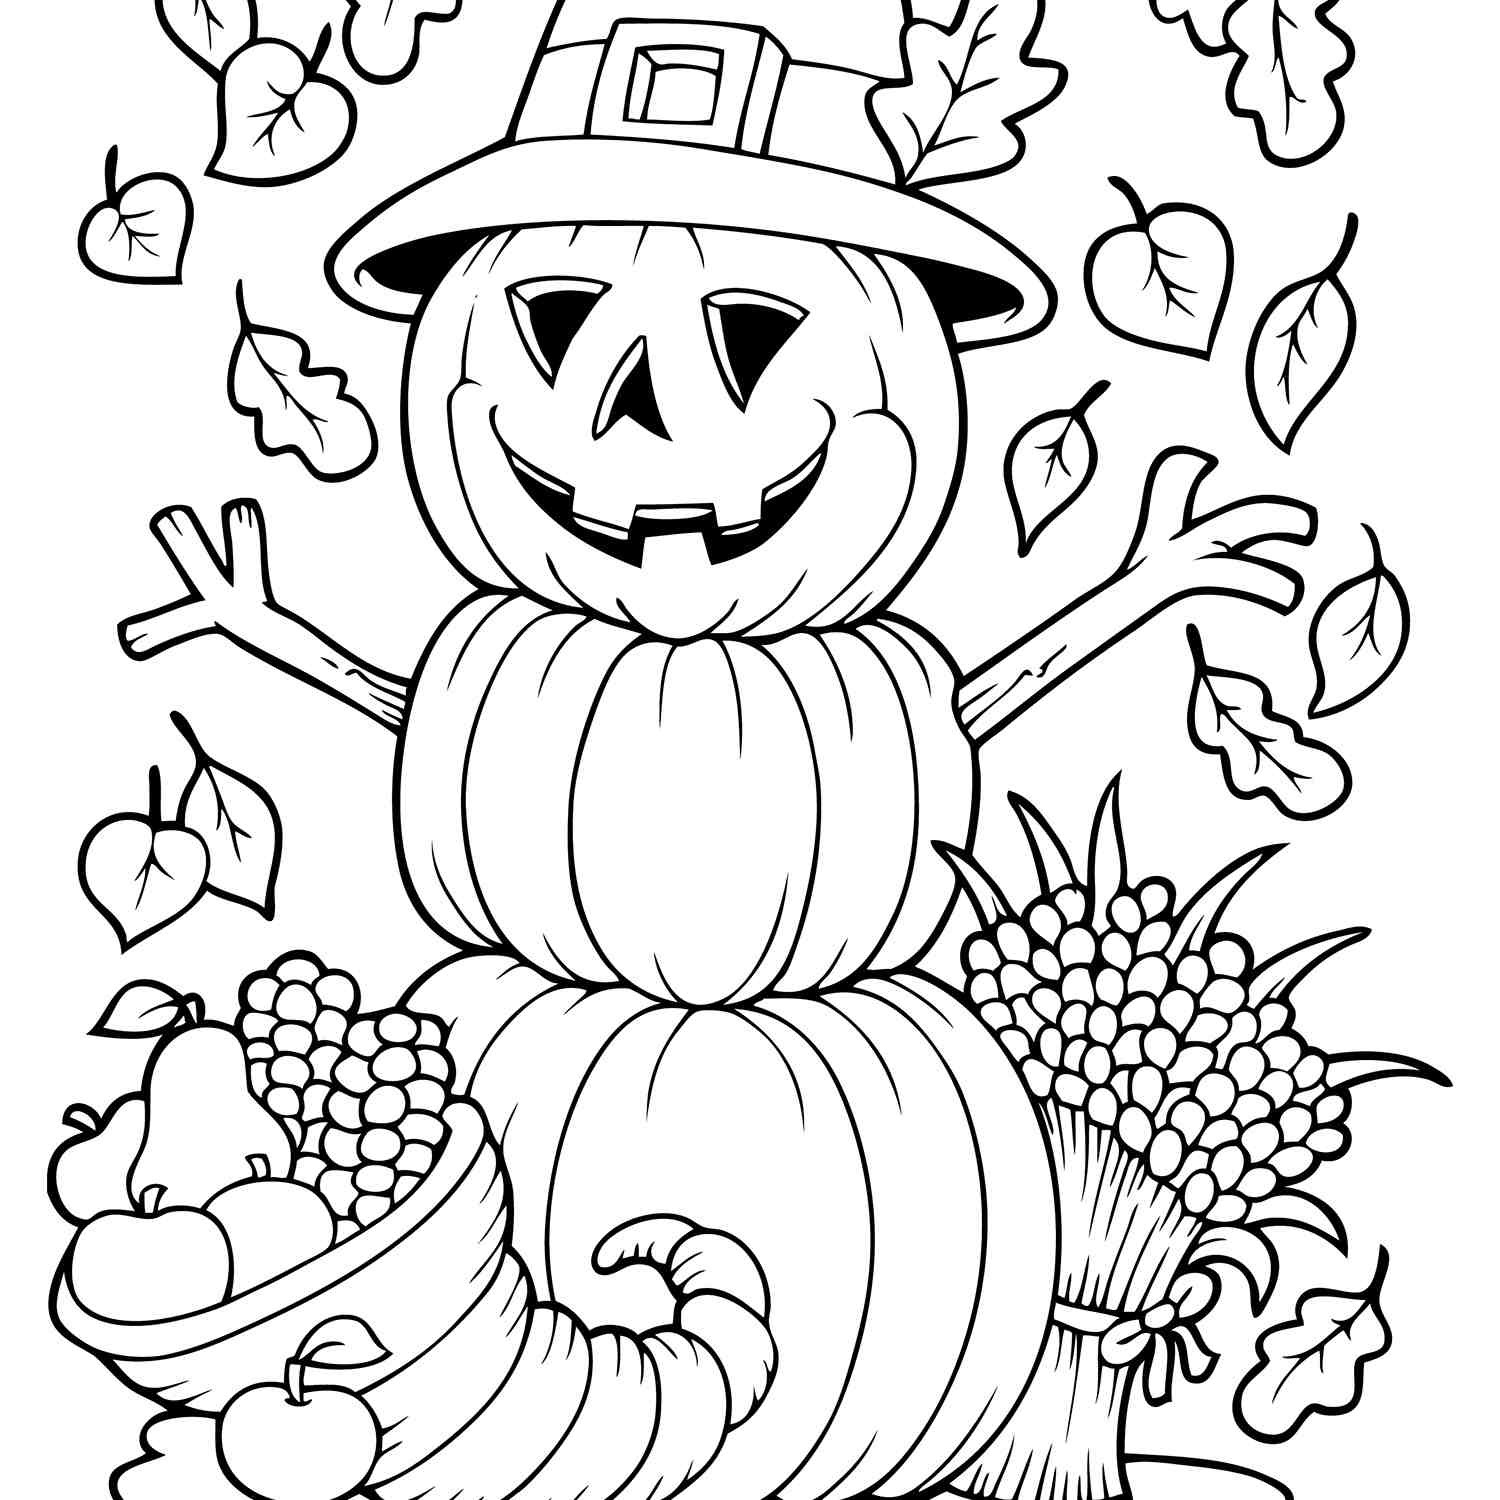 Fall Coloring Pages Free Printable
 Free Autumn and Fall Coloring Pages